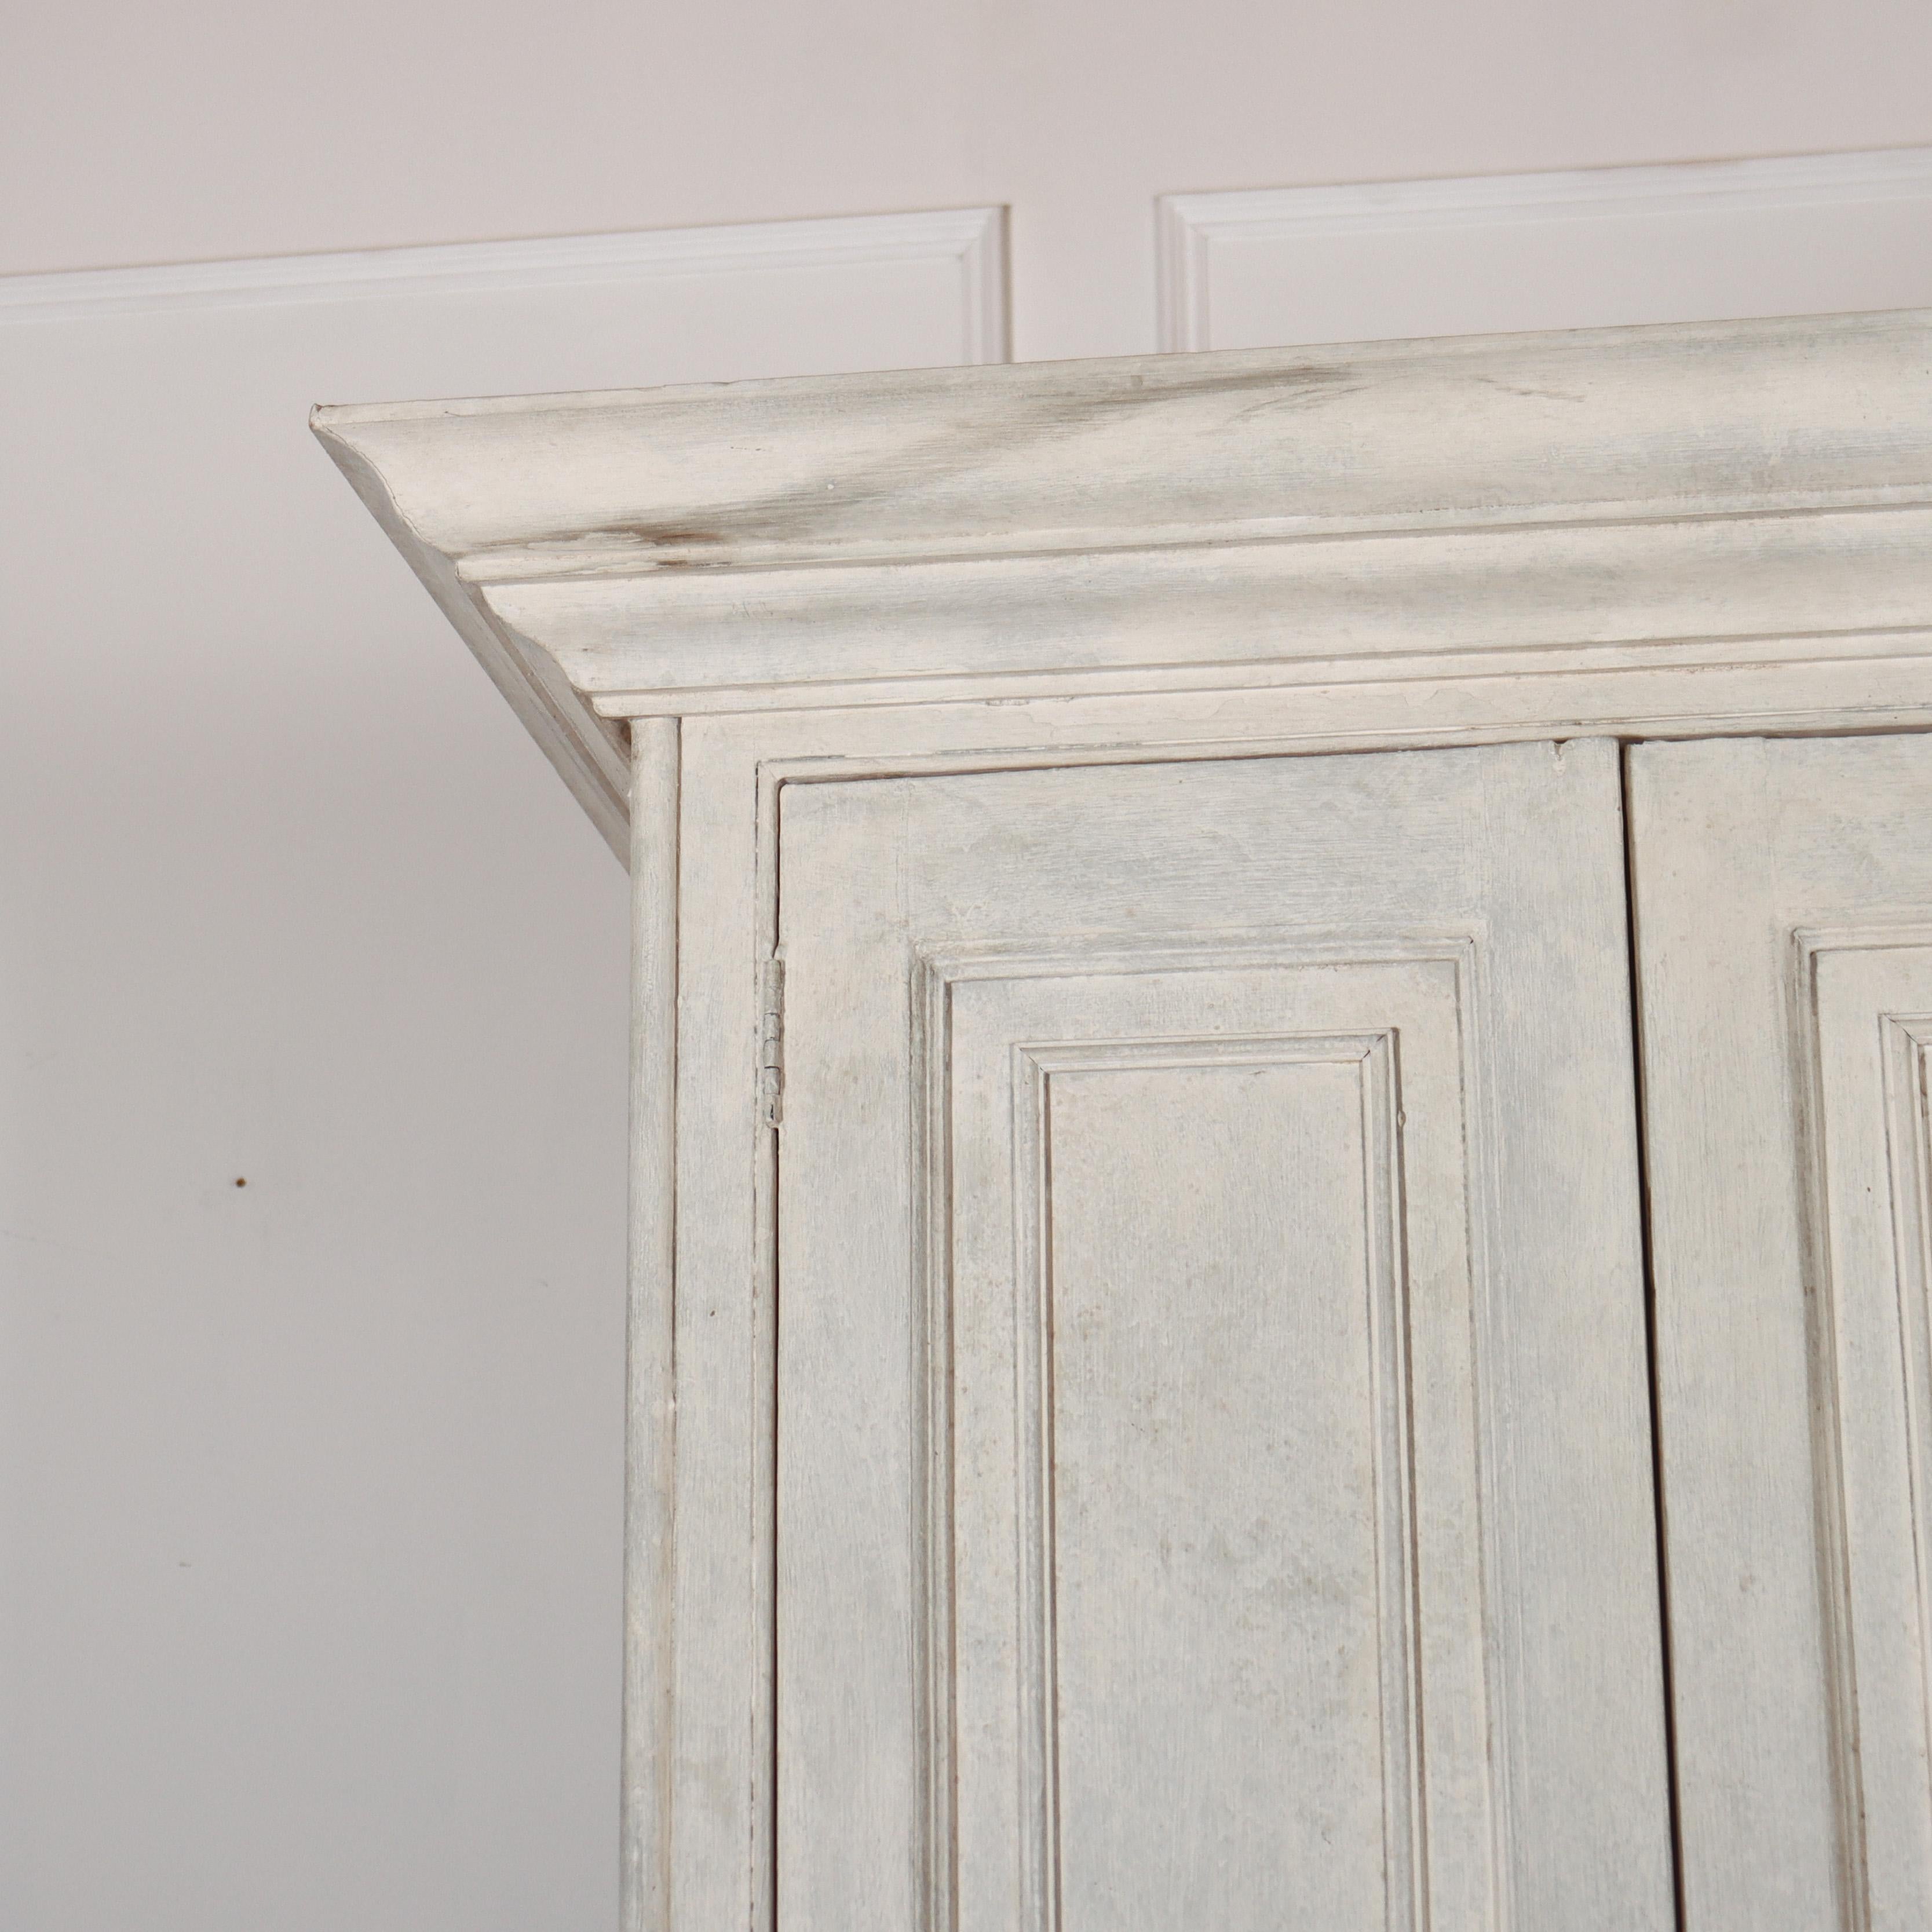 English Painted Linen Cupboard In Good Condition For Sale In Leamington Spa, Warwickshire